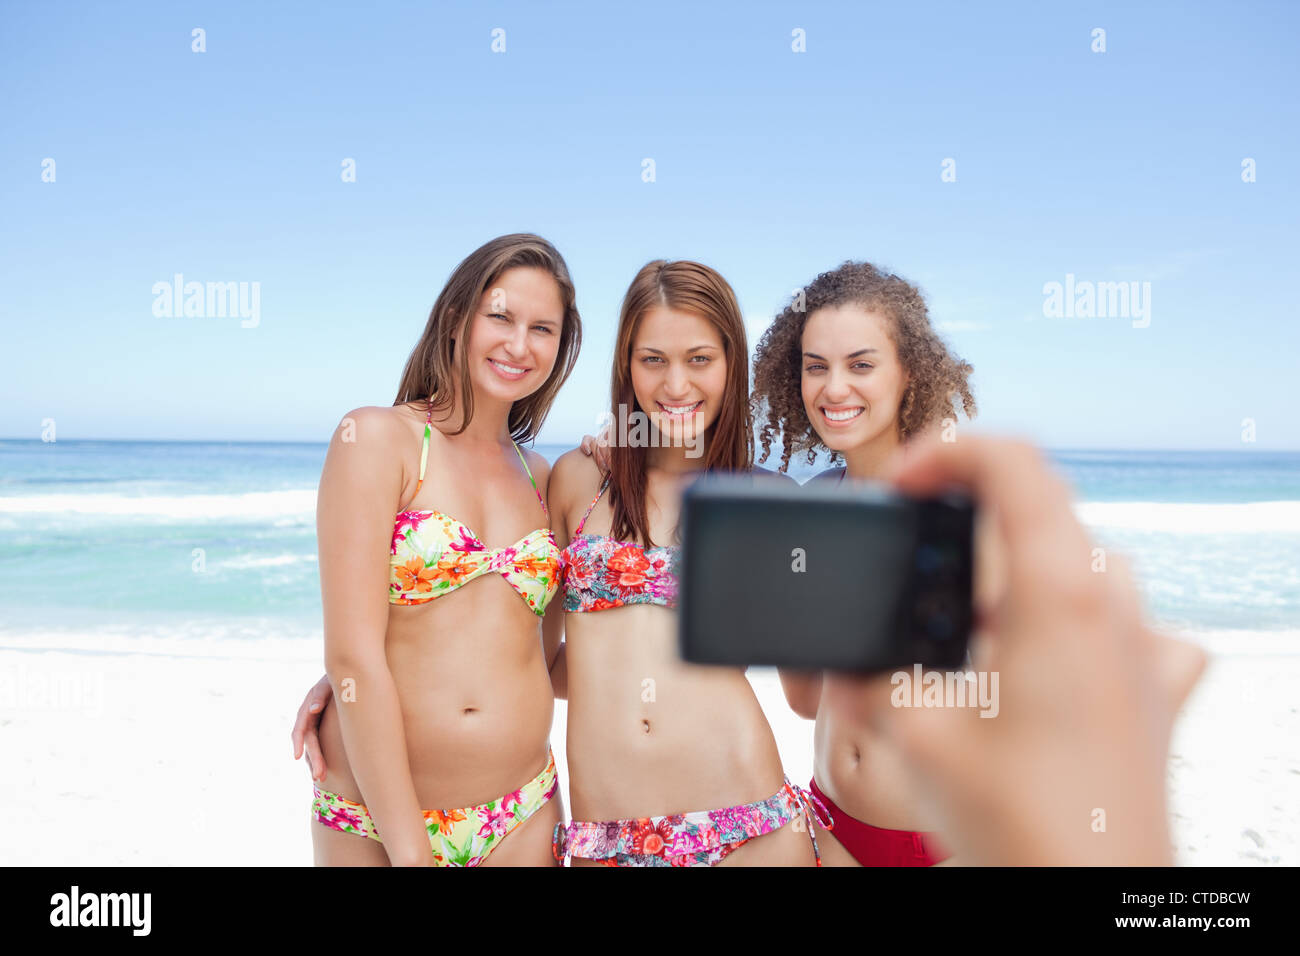 Somebody taking a photo of three posing friends Stock Photo